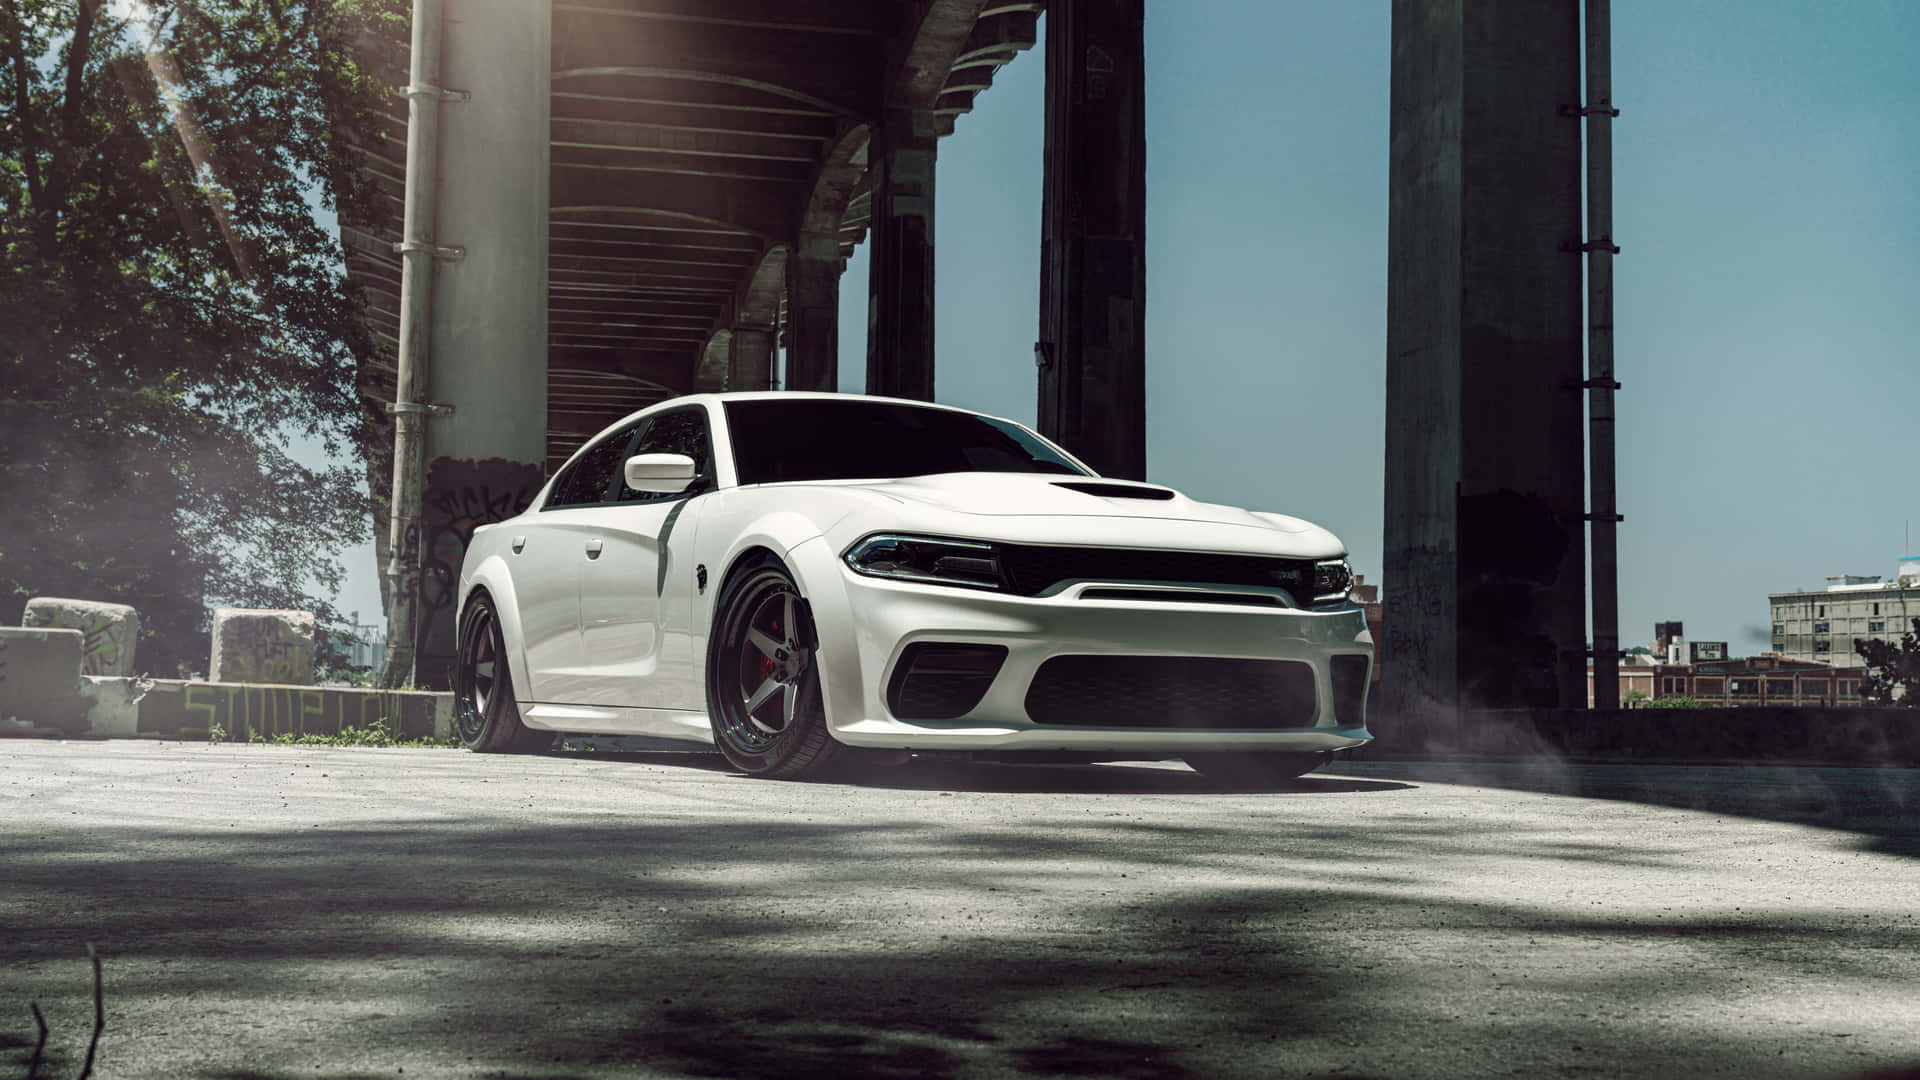 Download Experience Aggressive Speed and Power with the Dodge Hellcat  Wallpaper 